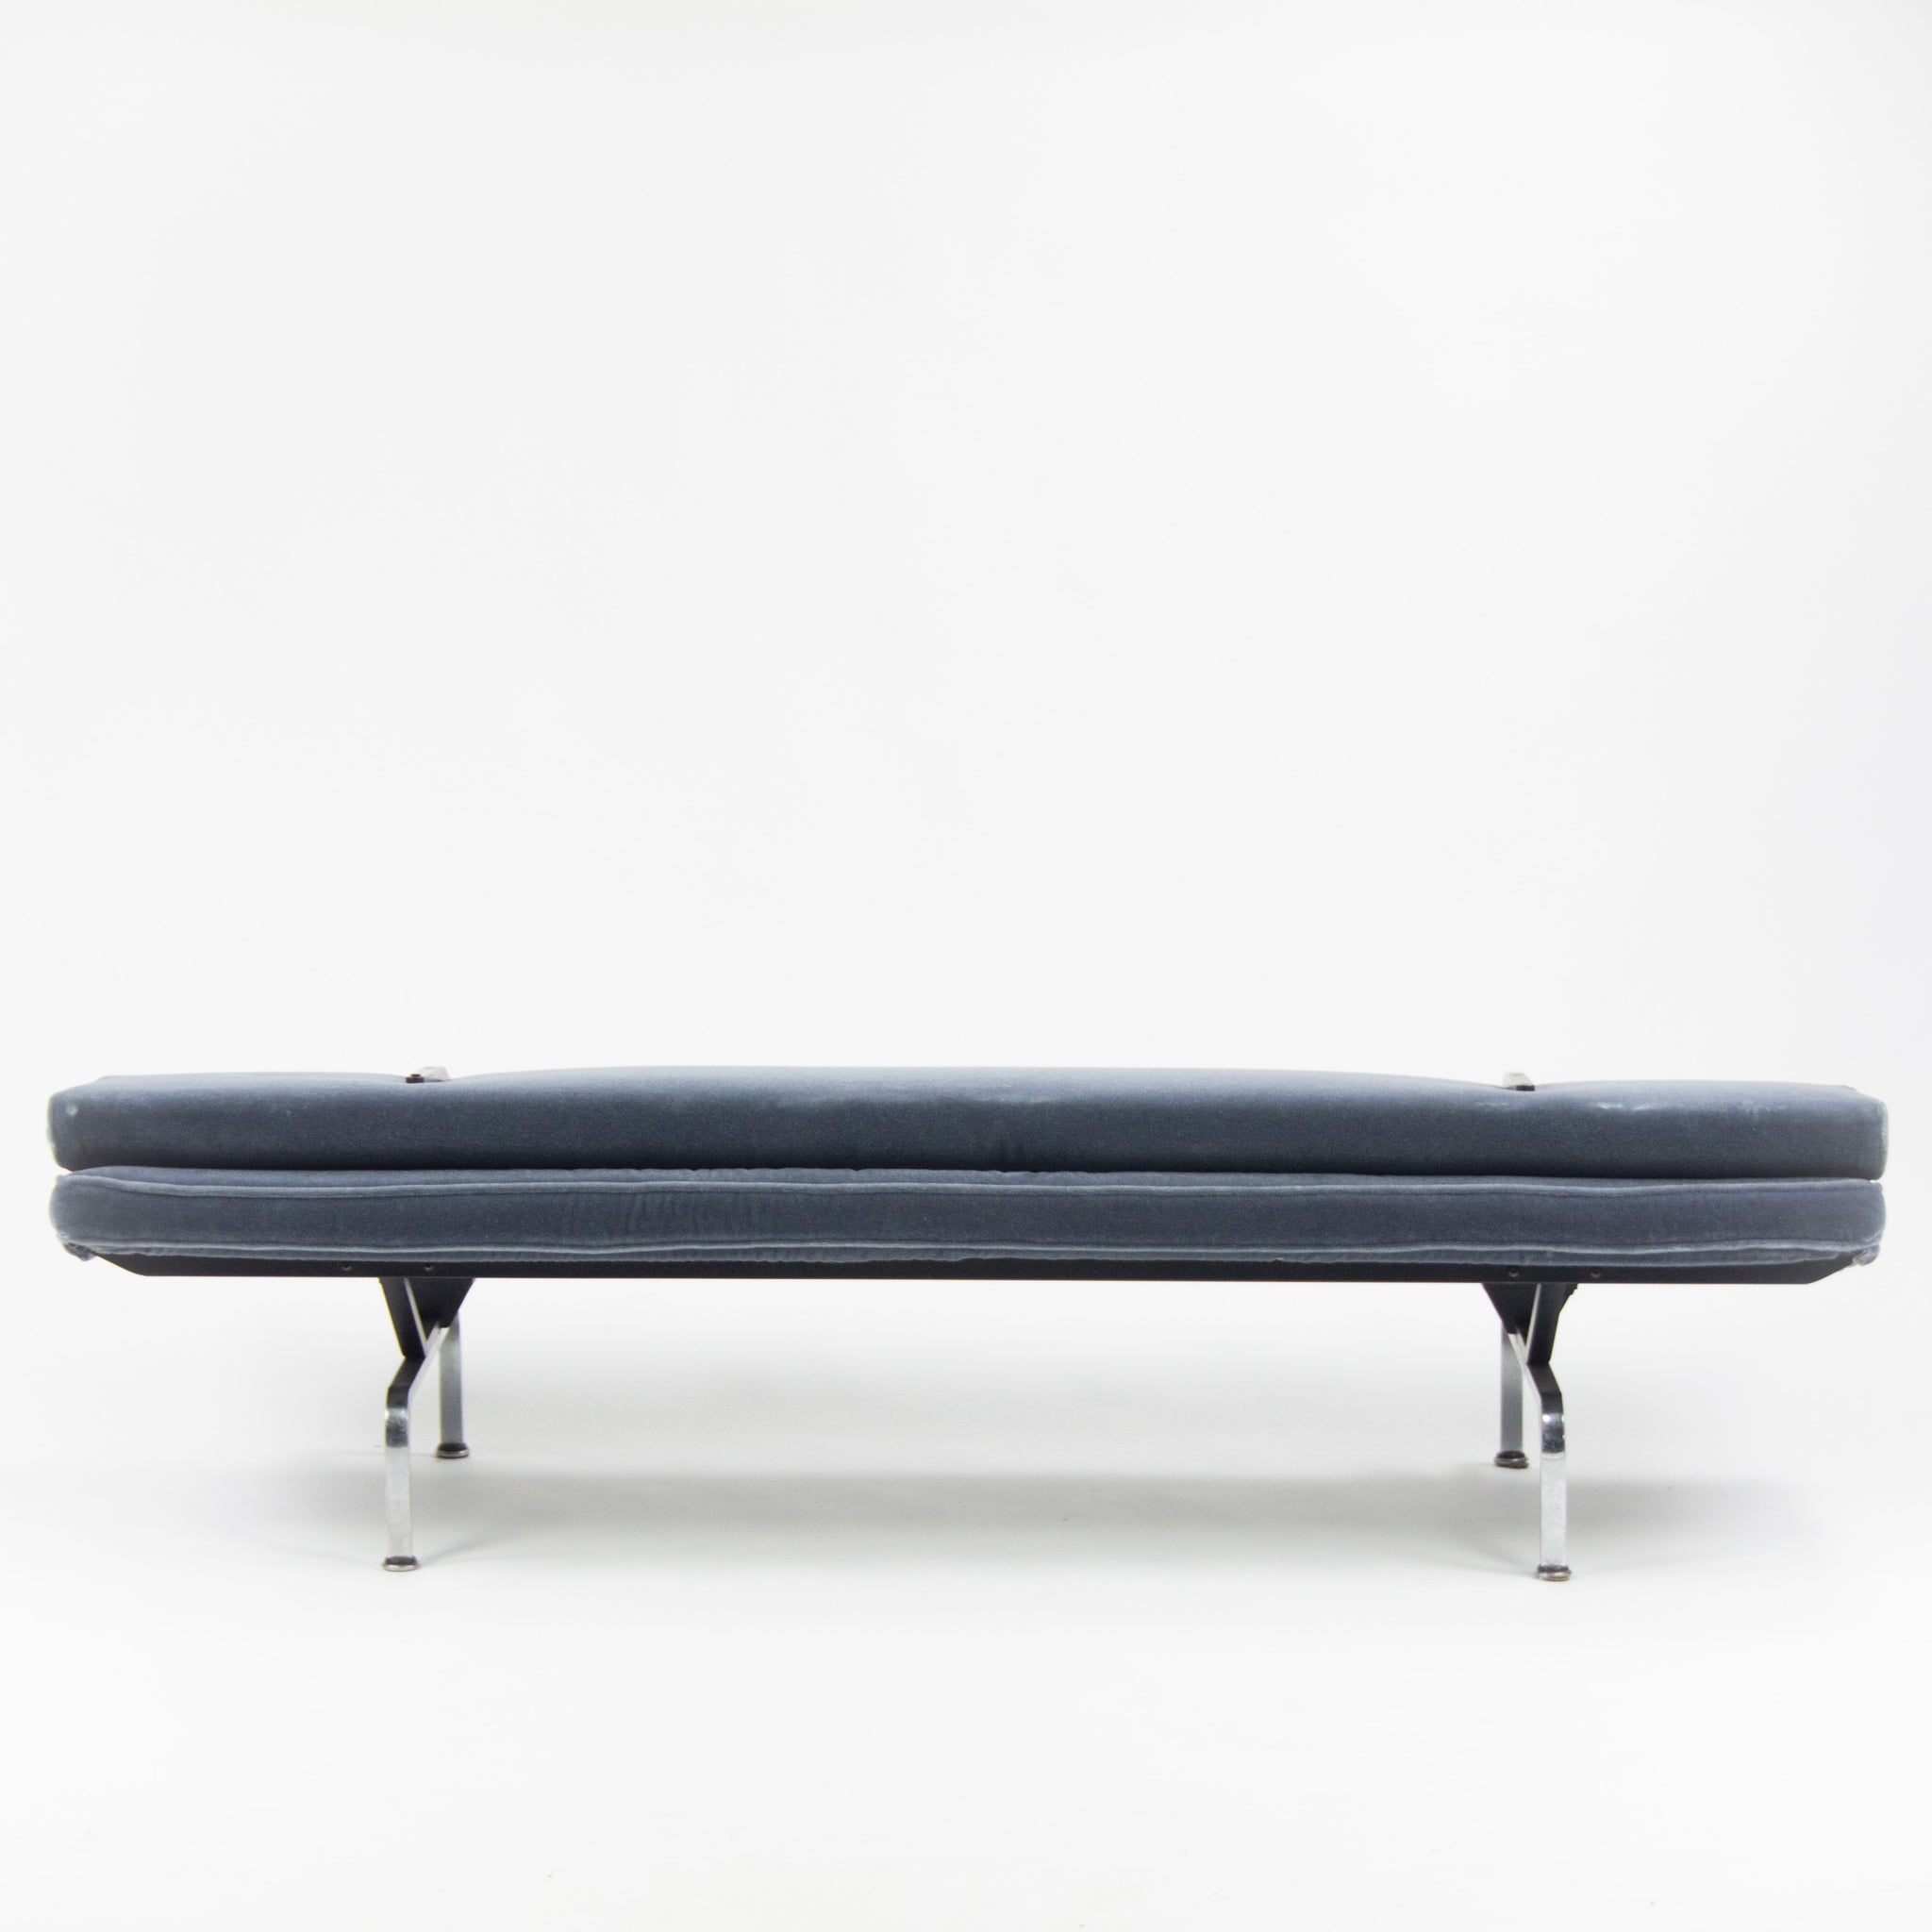 SOLD 1950's Original Eames Herman Miller Sofa Compact with Blue Mohair Upholstery